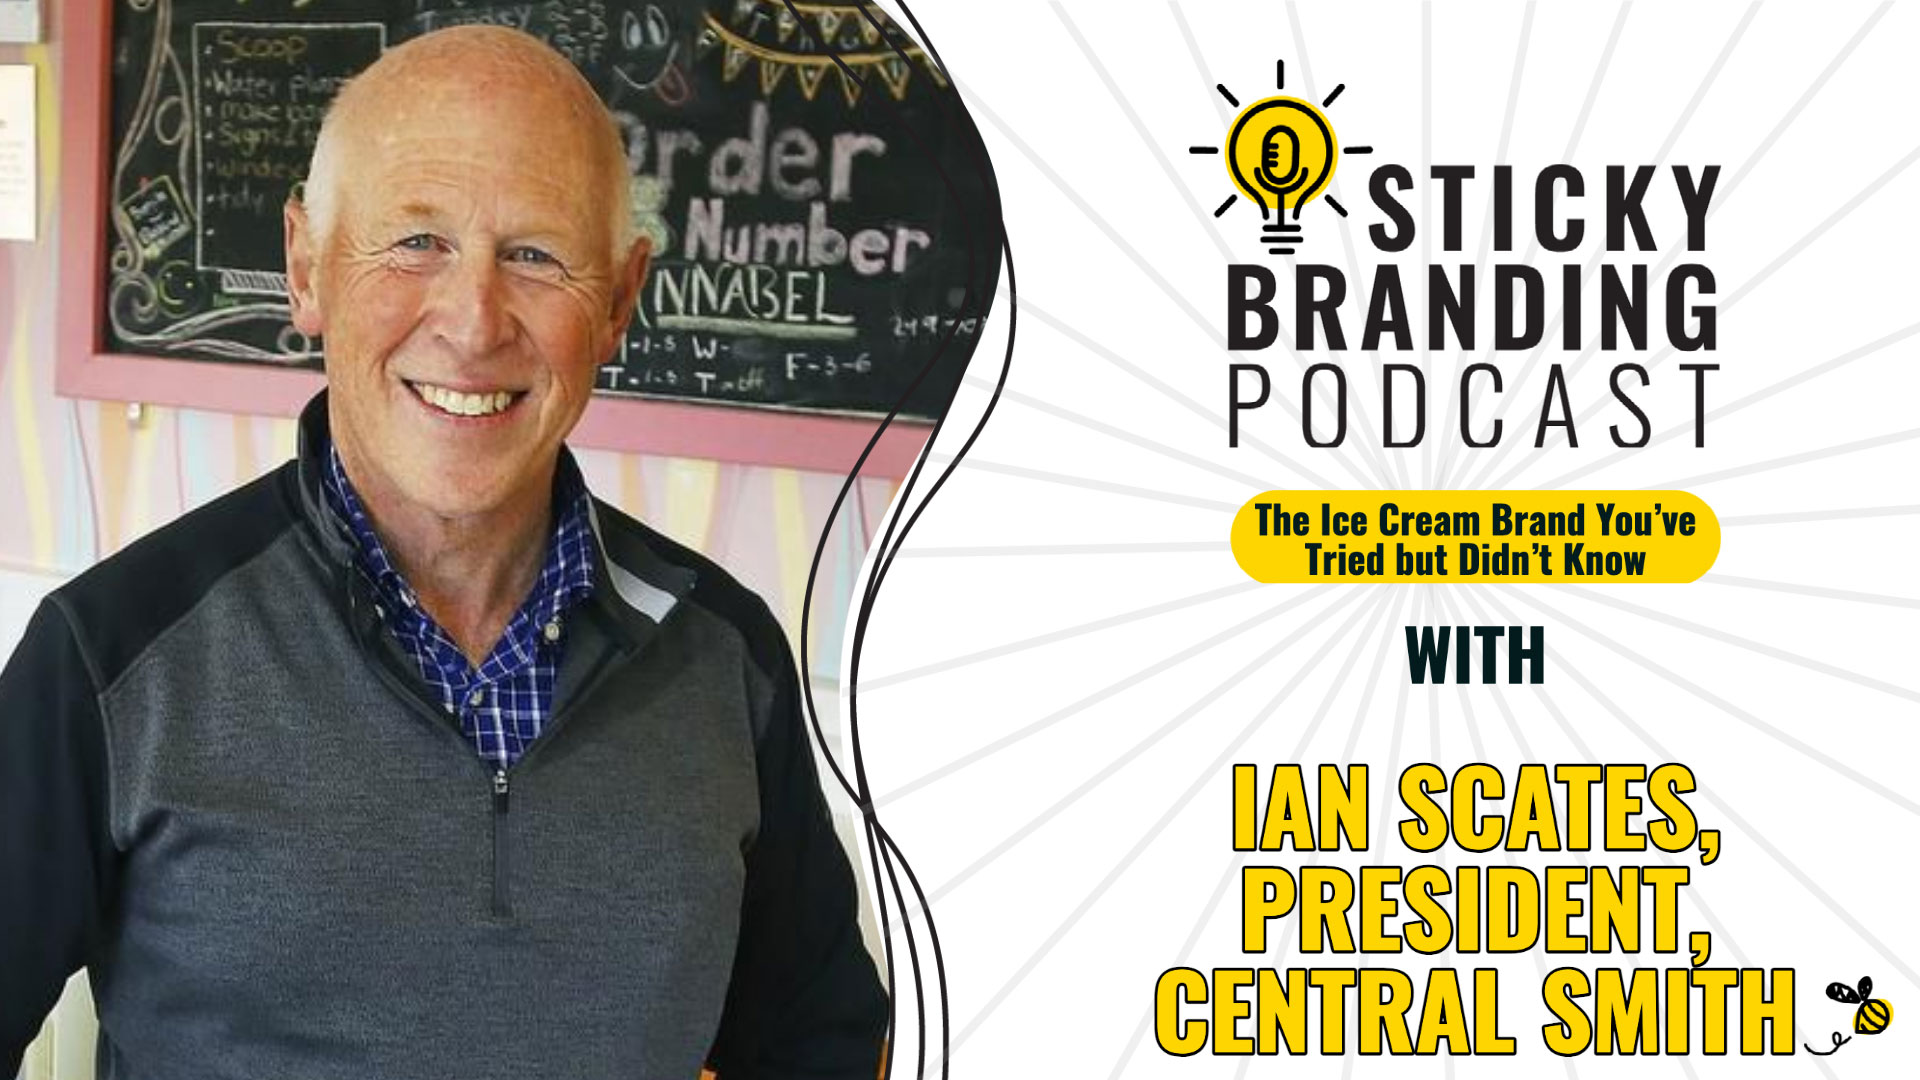 The Ice Cream Brand You’ve Tried but Didn’t Know — Interview with Ian Scates, President of Central Smith